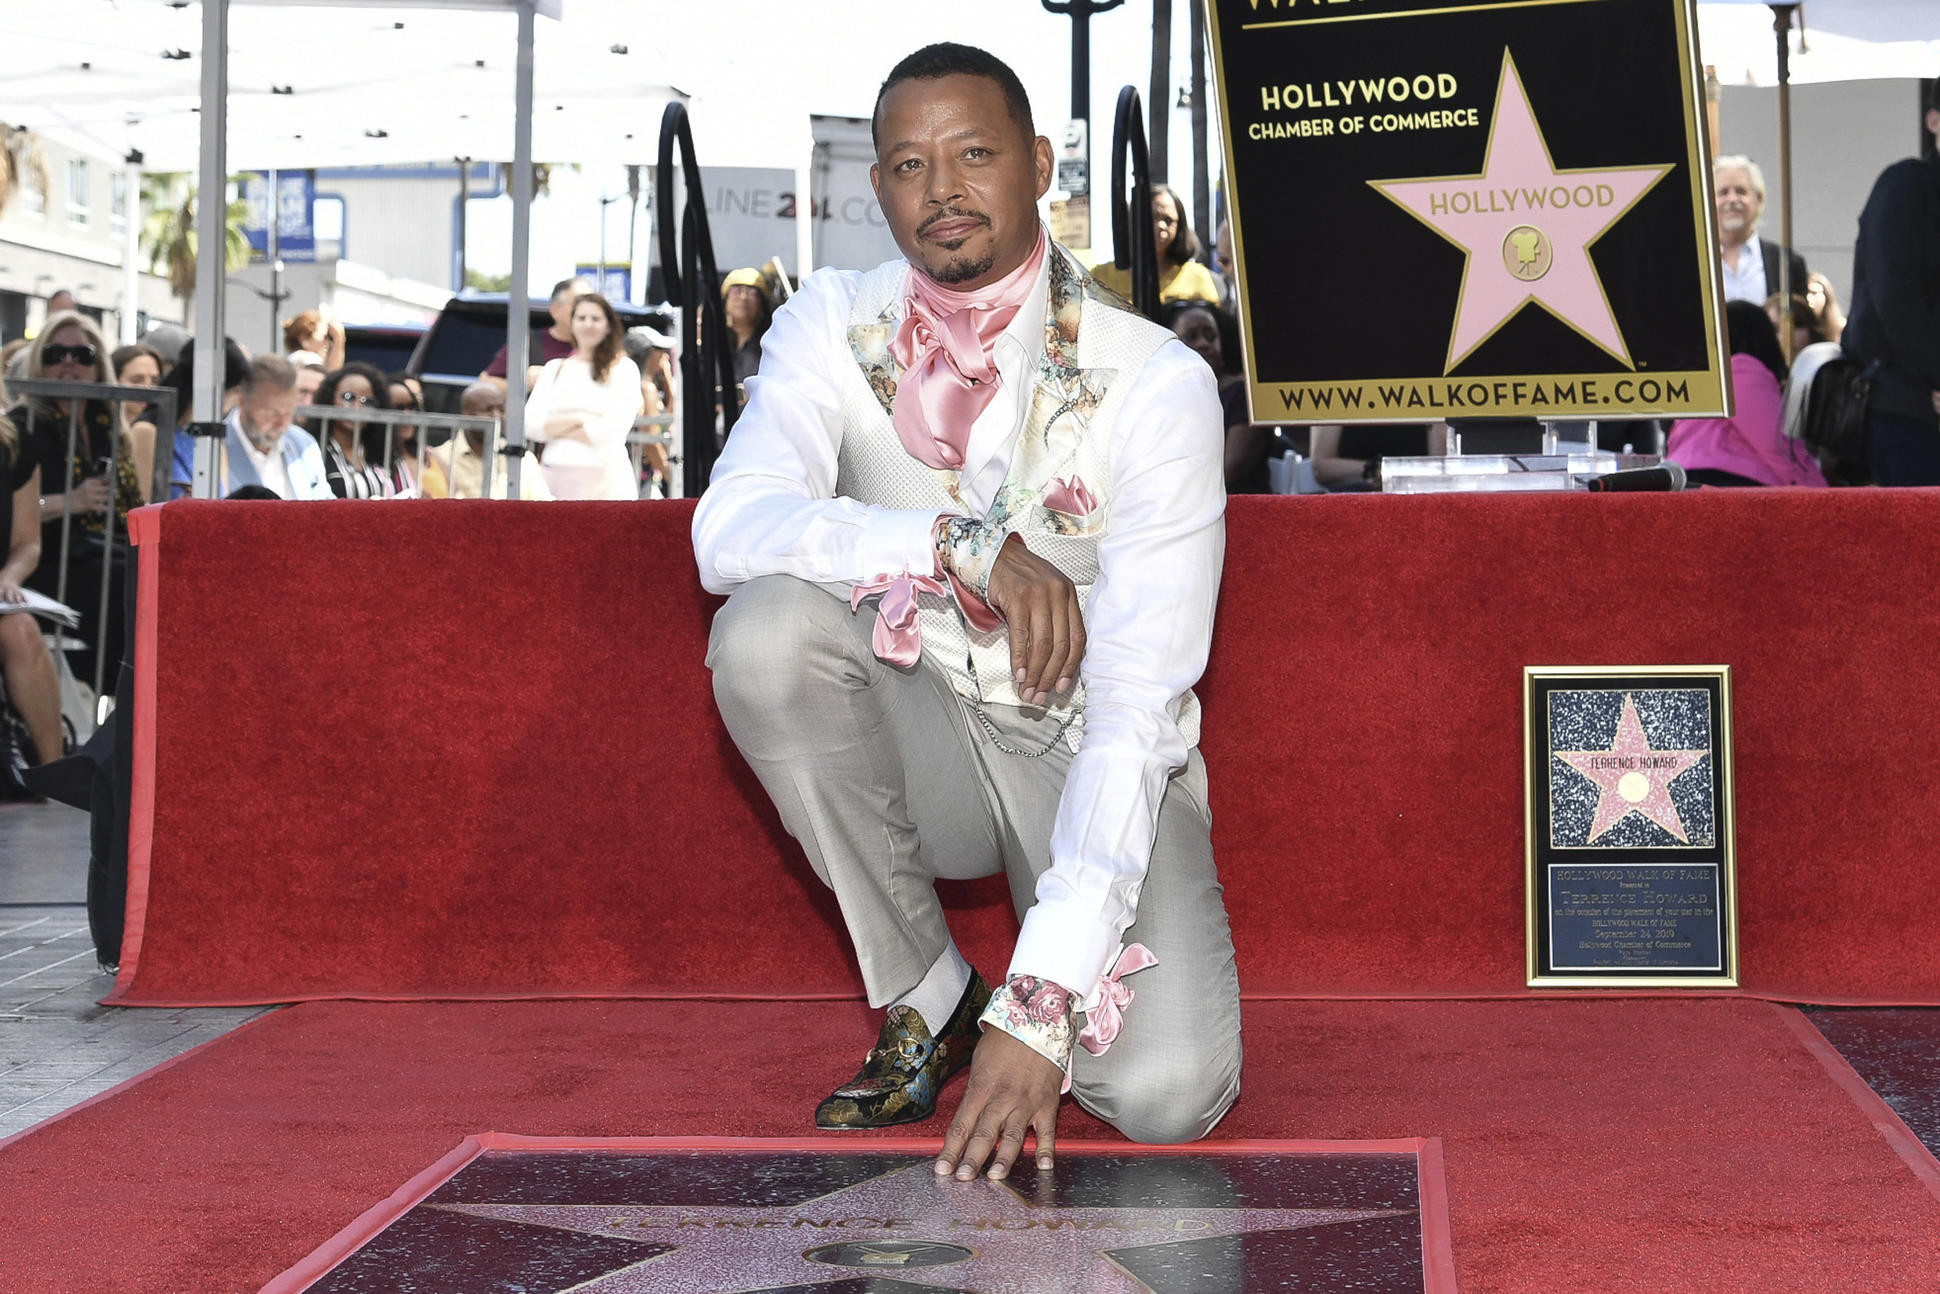 Empire star recognition, Terrence Howard honored, Hollywood acclaim, TV series success, 1940x1300 HD Desktop